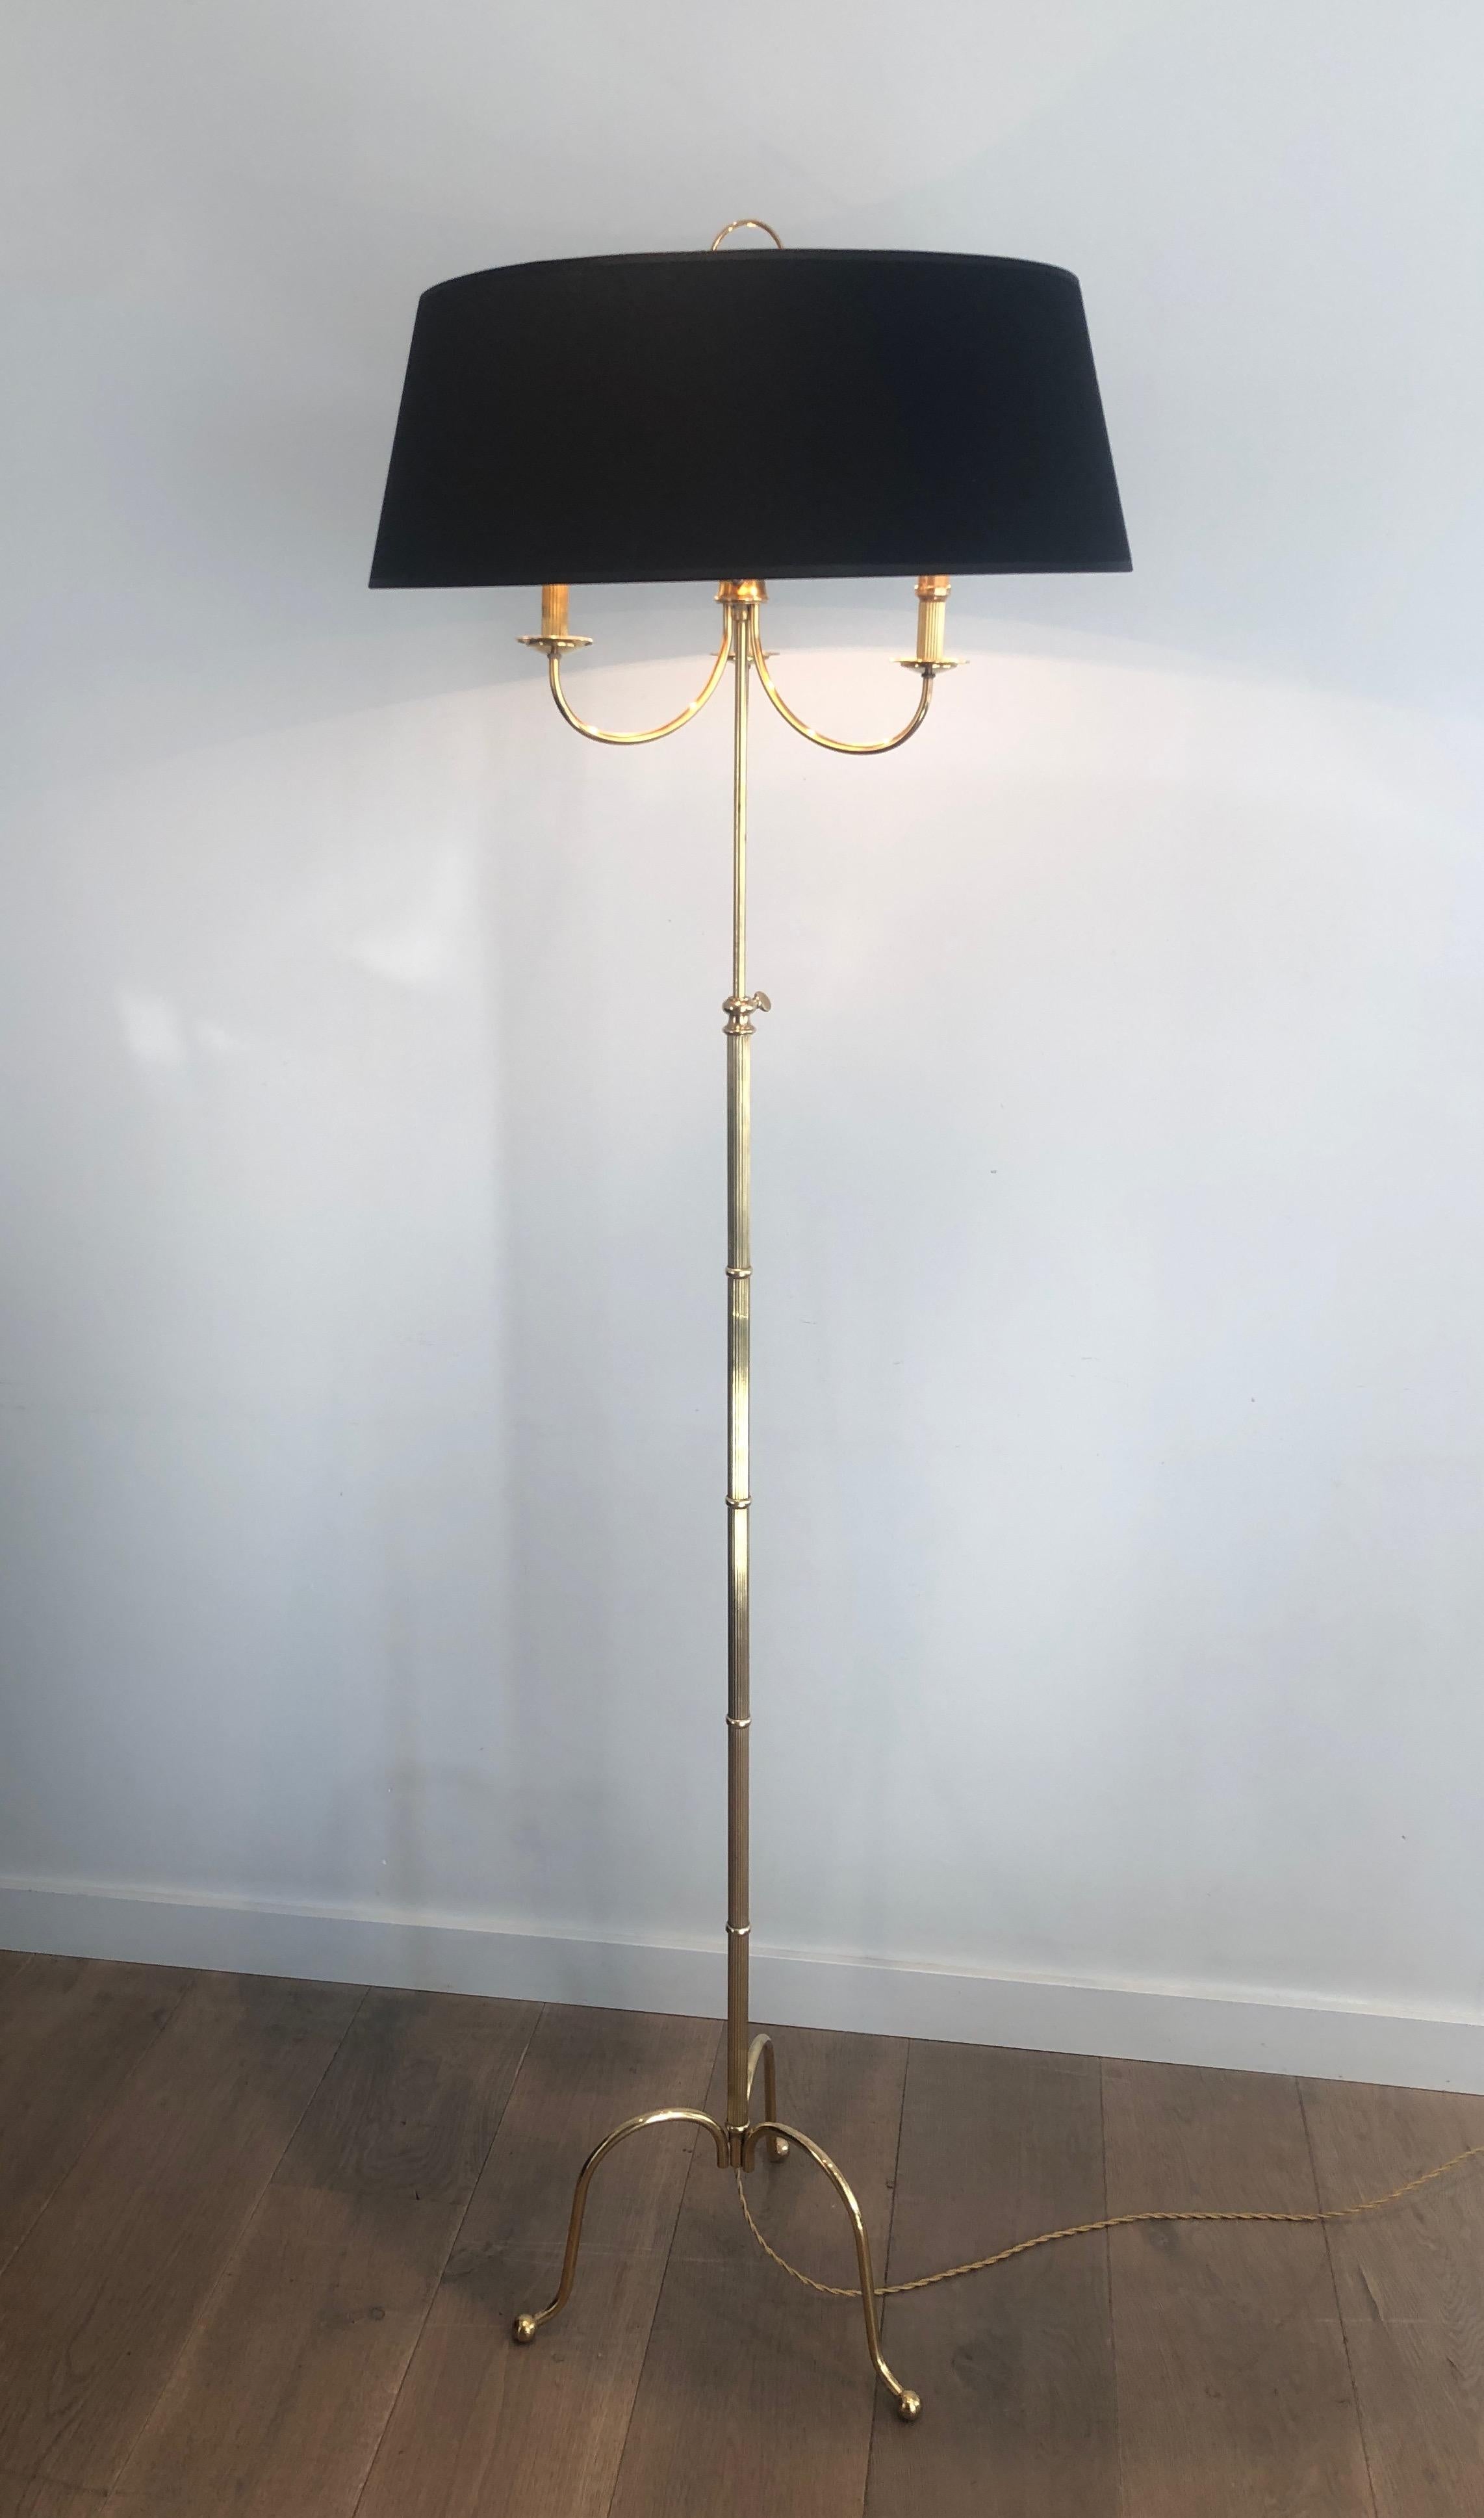 Tripode Brass Floor Lamp with 3 Arms, French Work by Maison Jansen For Sale 8